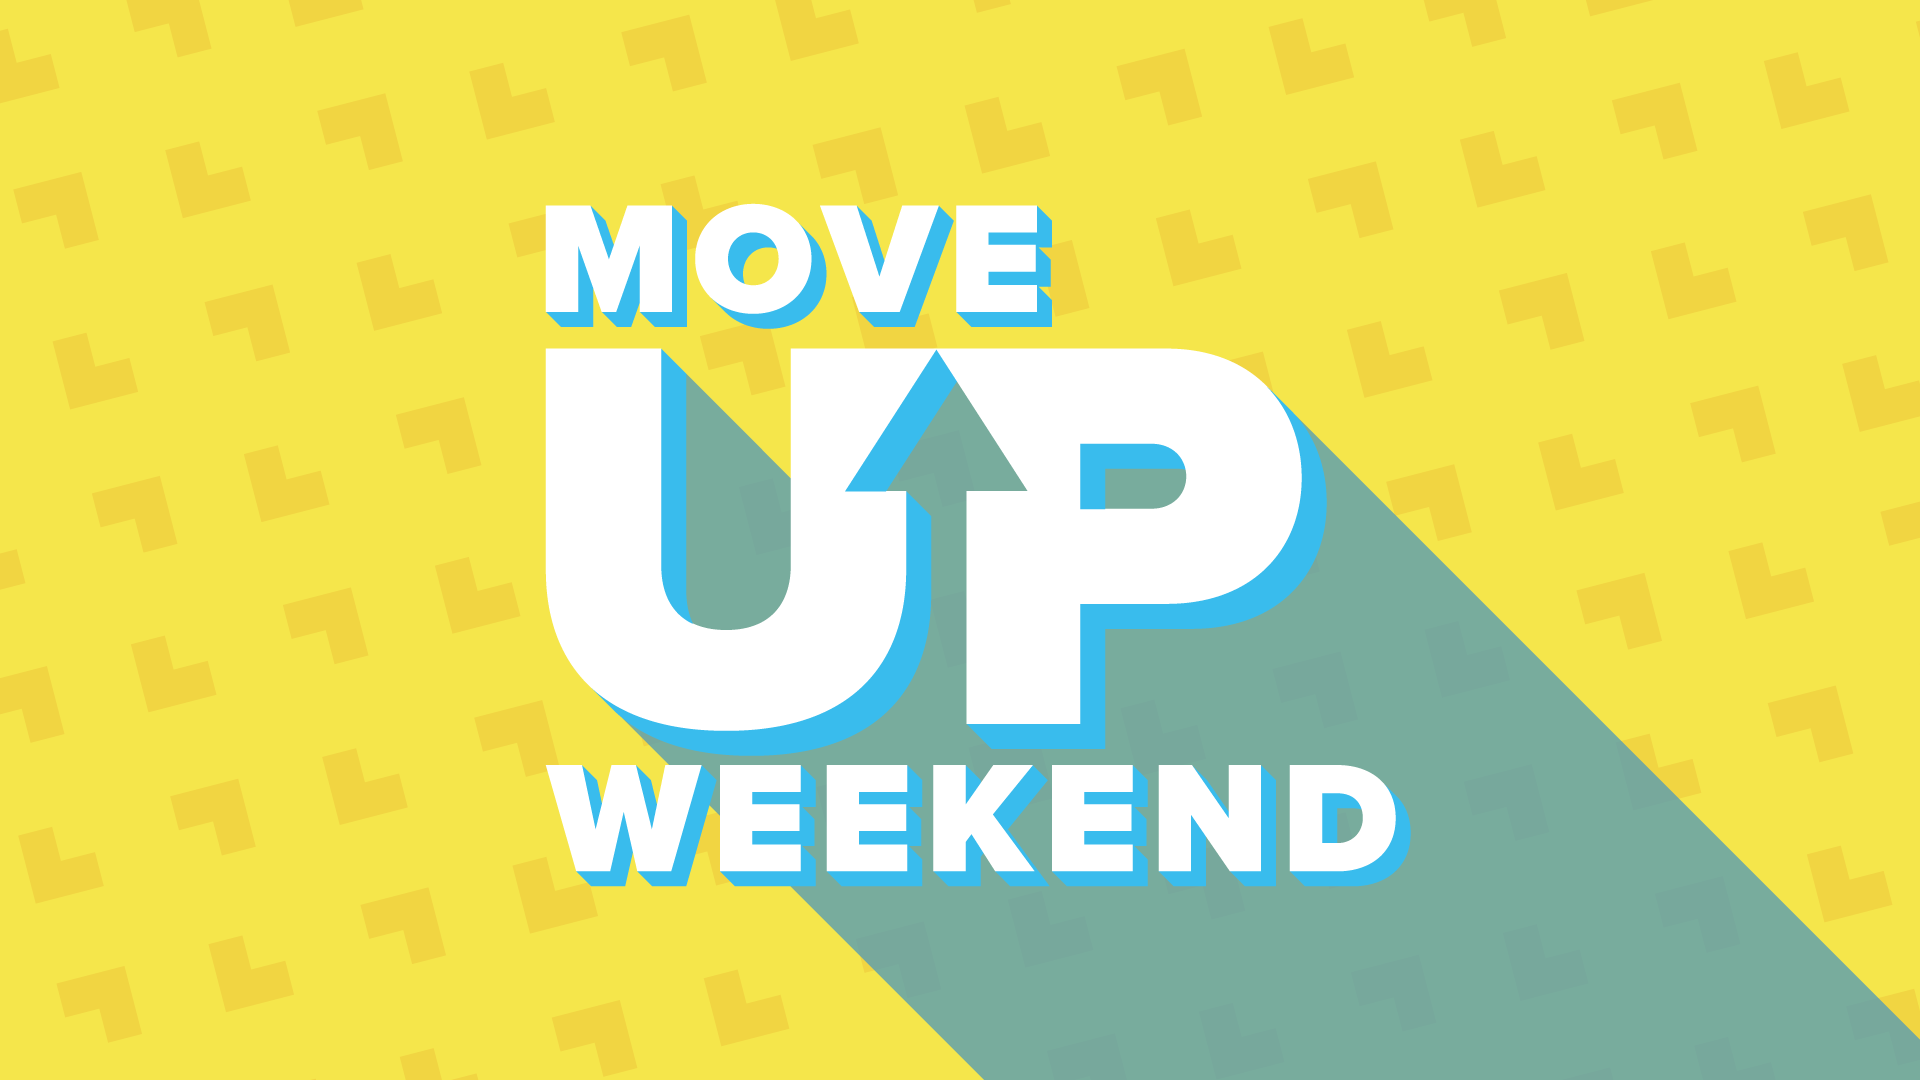 Move Up Weekend